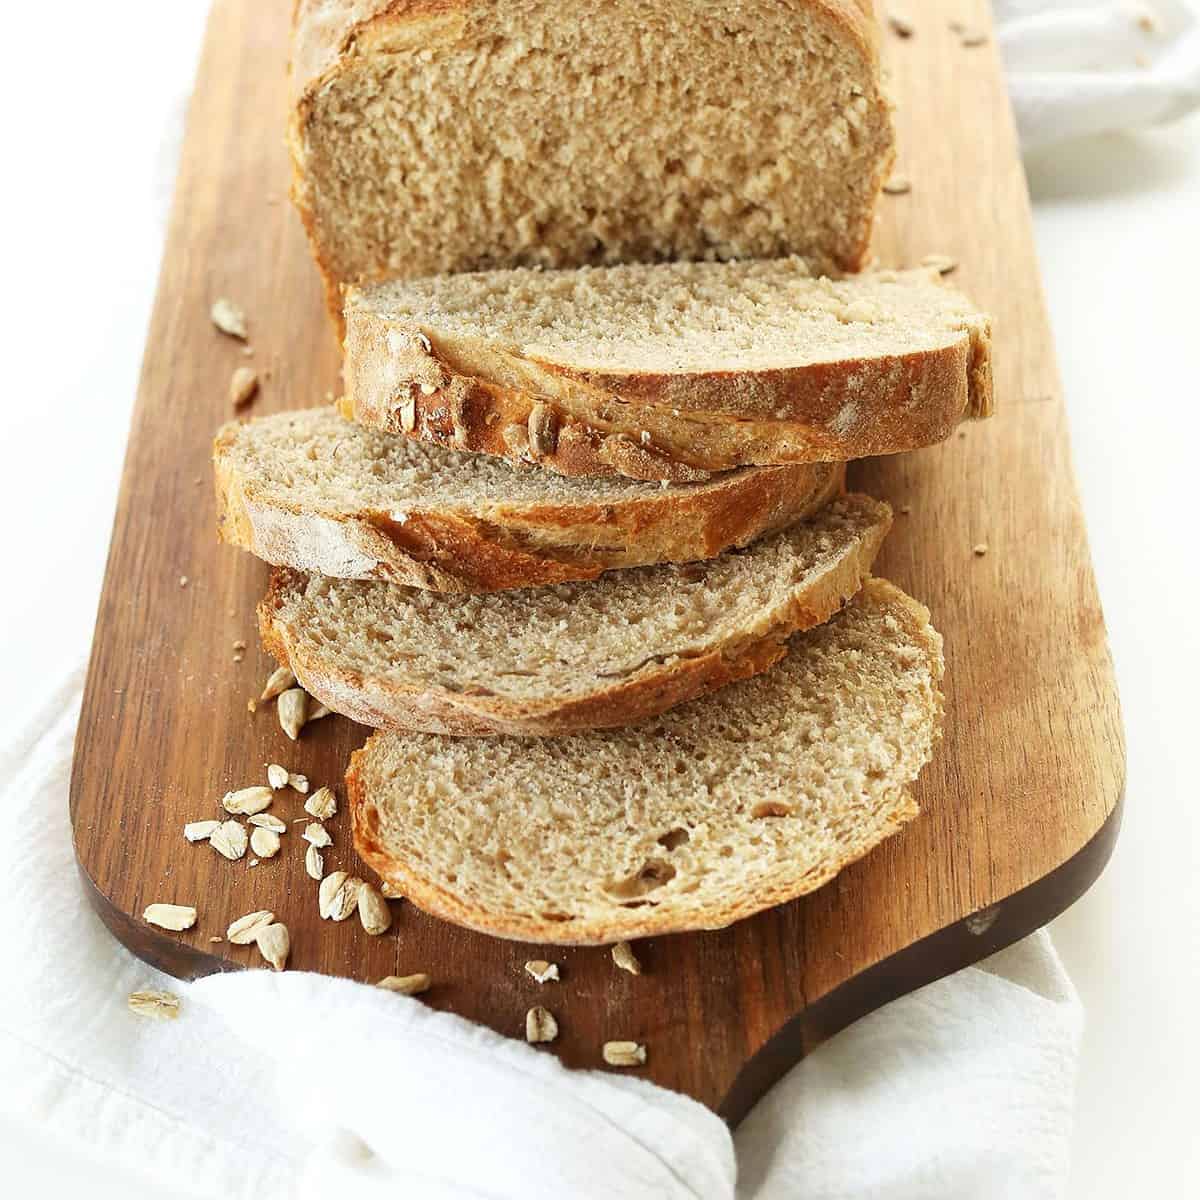  This bread is made with lots of love and whole grains, giving it a rich, nutty flavor.